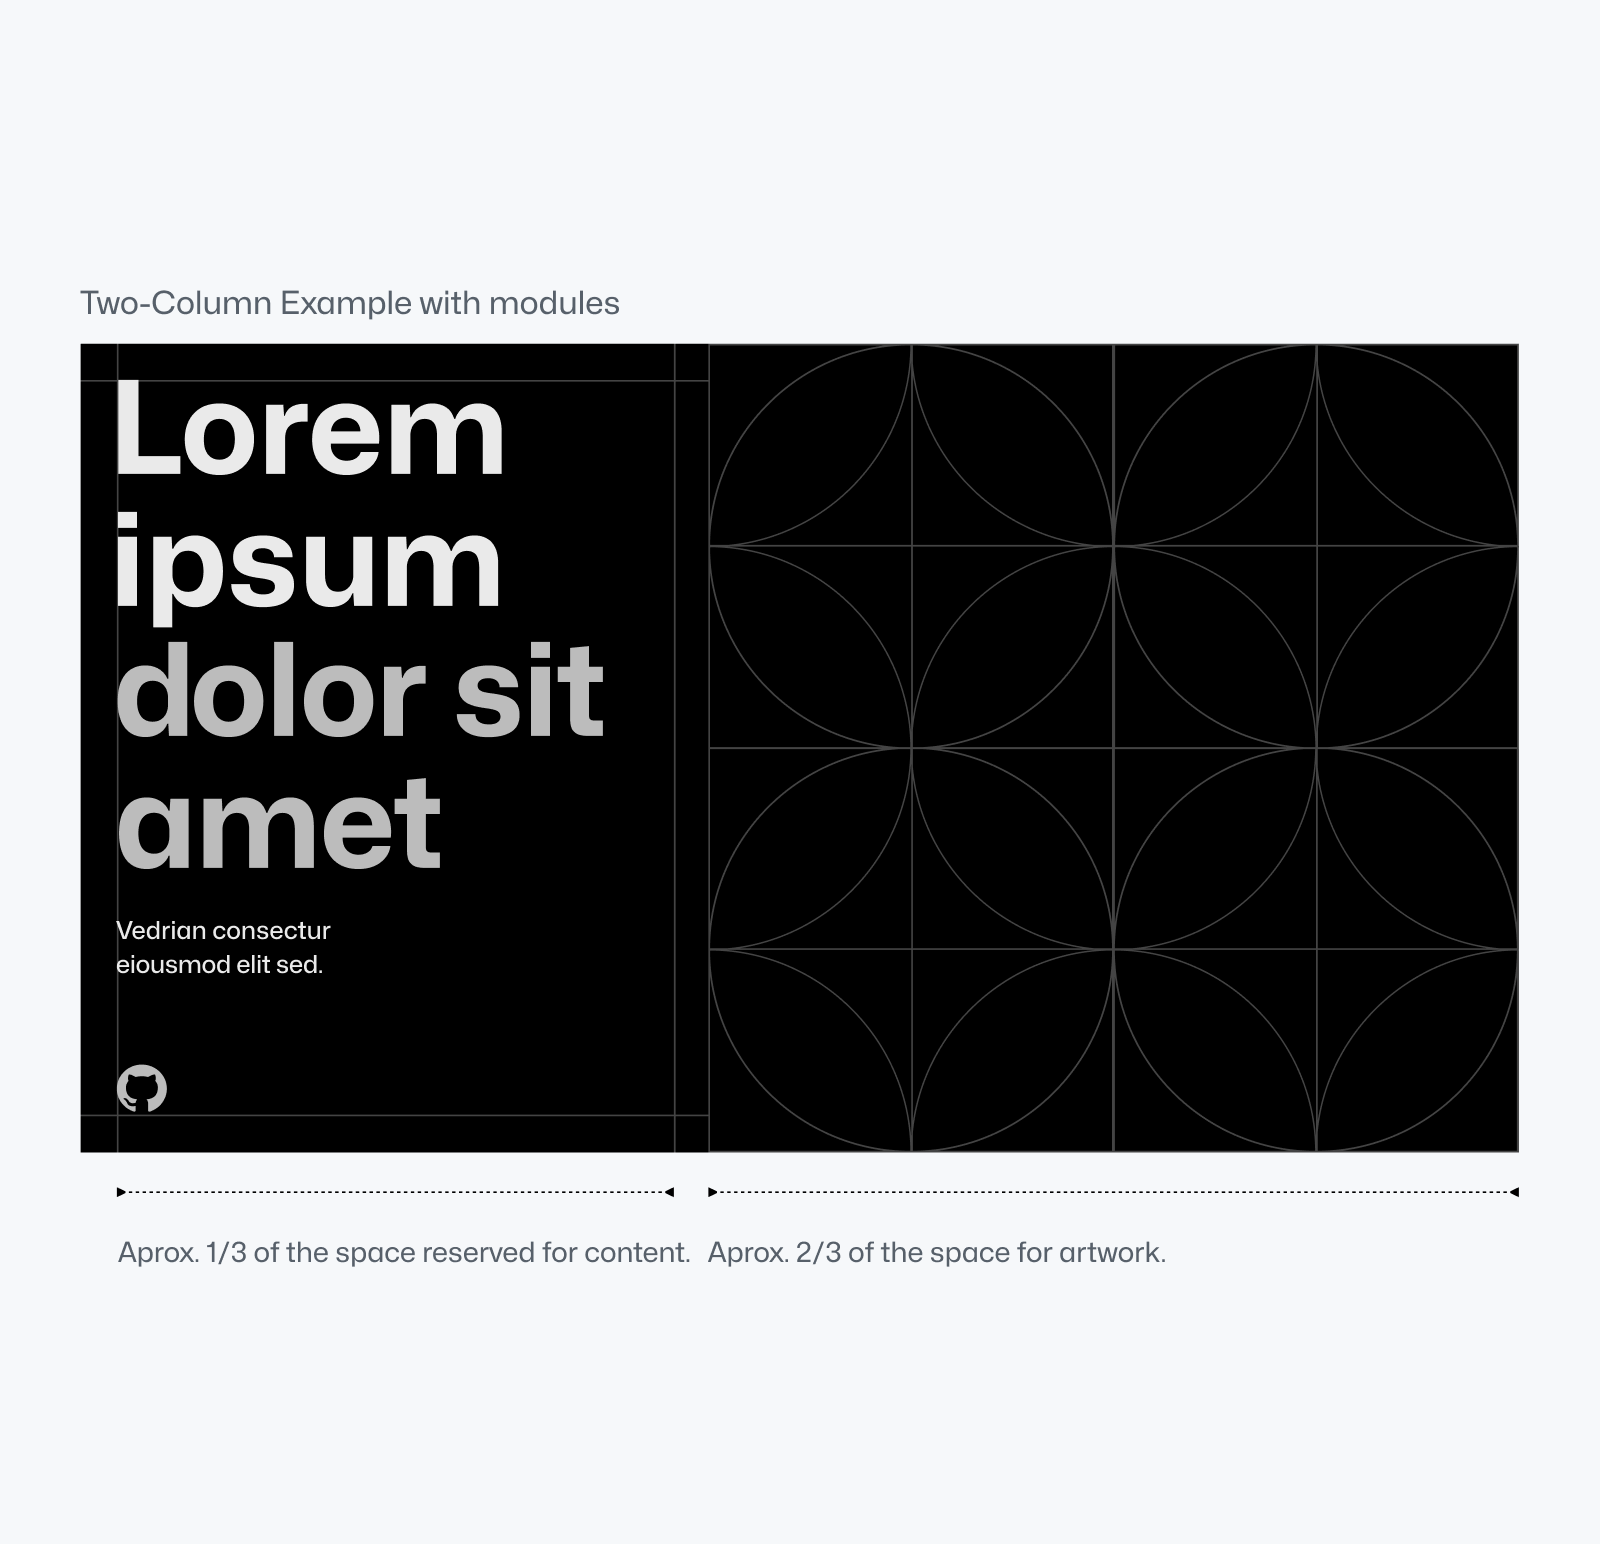 Text reading "Two-column example with modules" sits above black rectangle featuring both large and small placeholder lorem ipsum text on the left, with circular grid lines on the right.